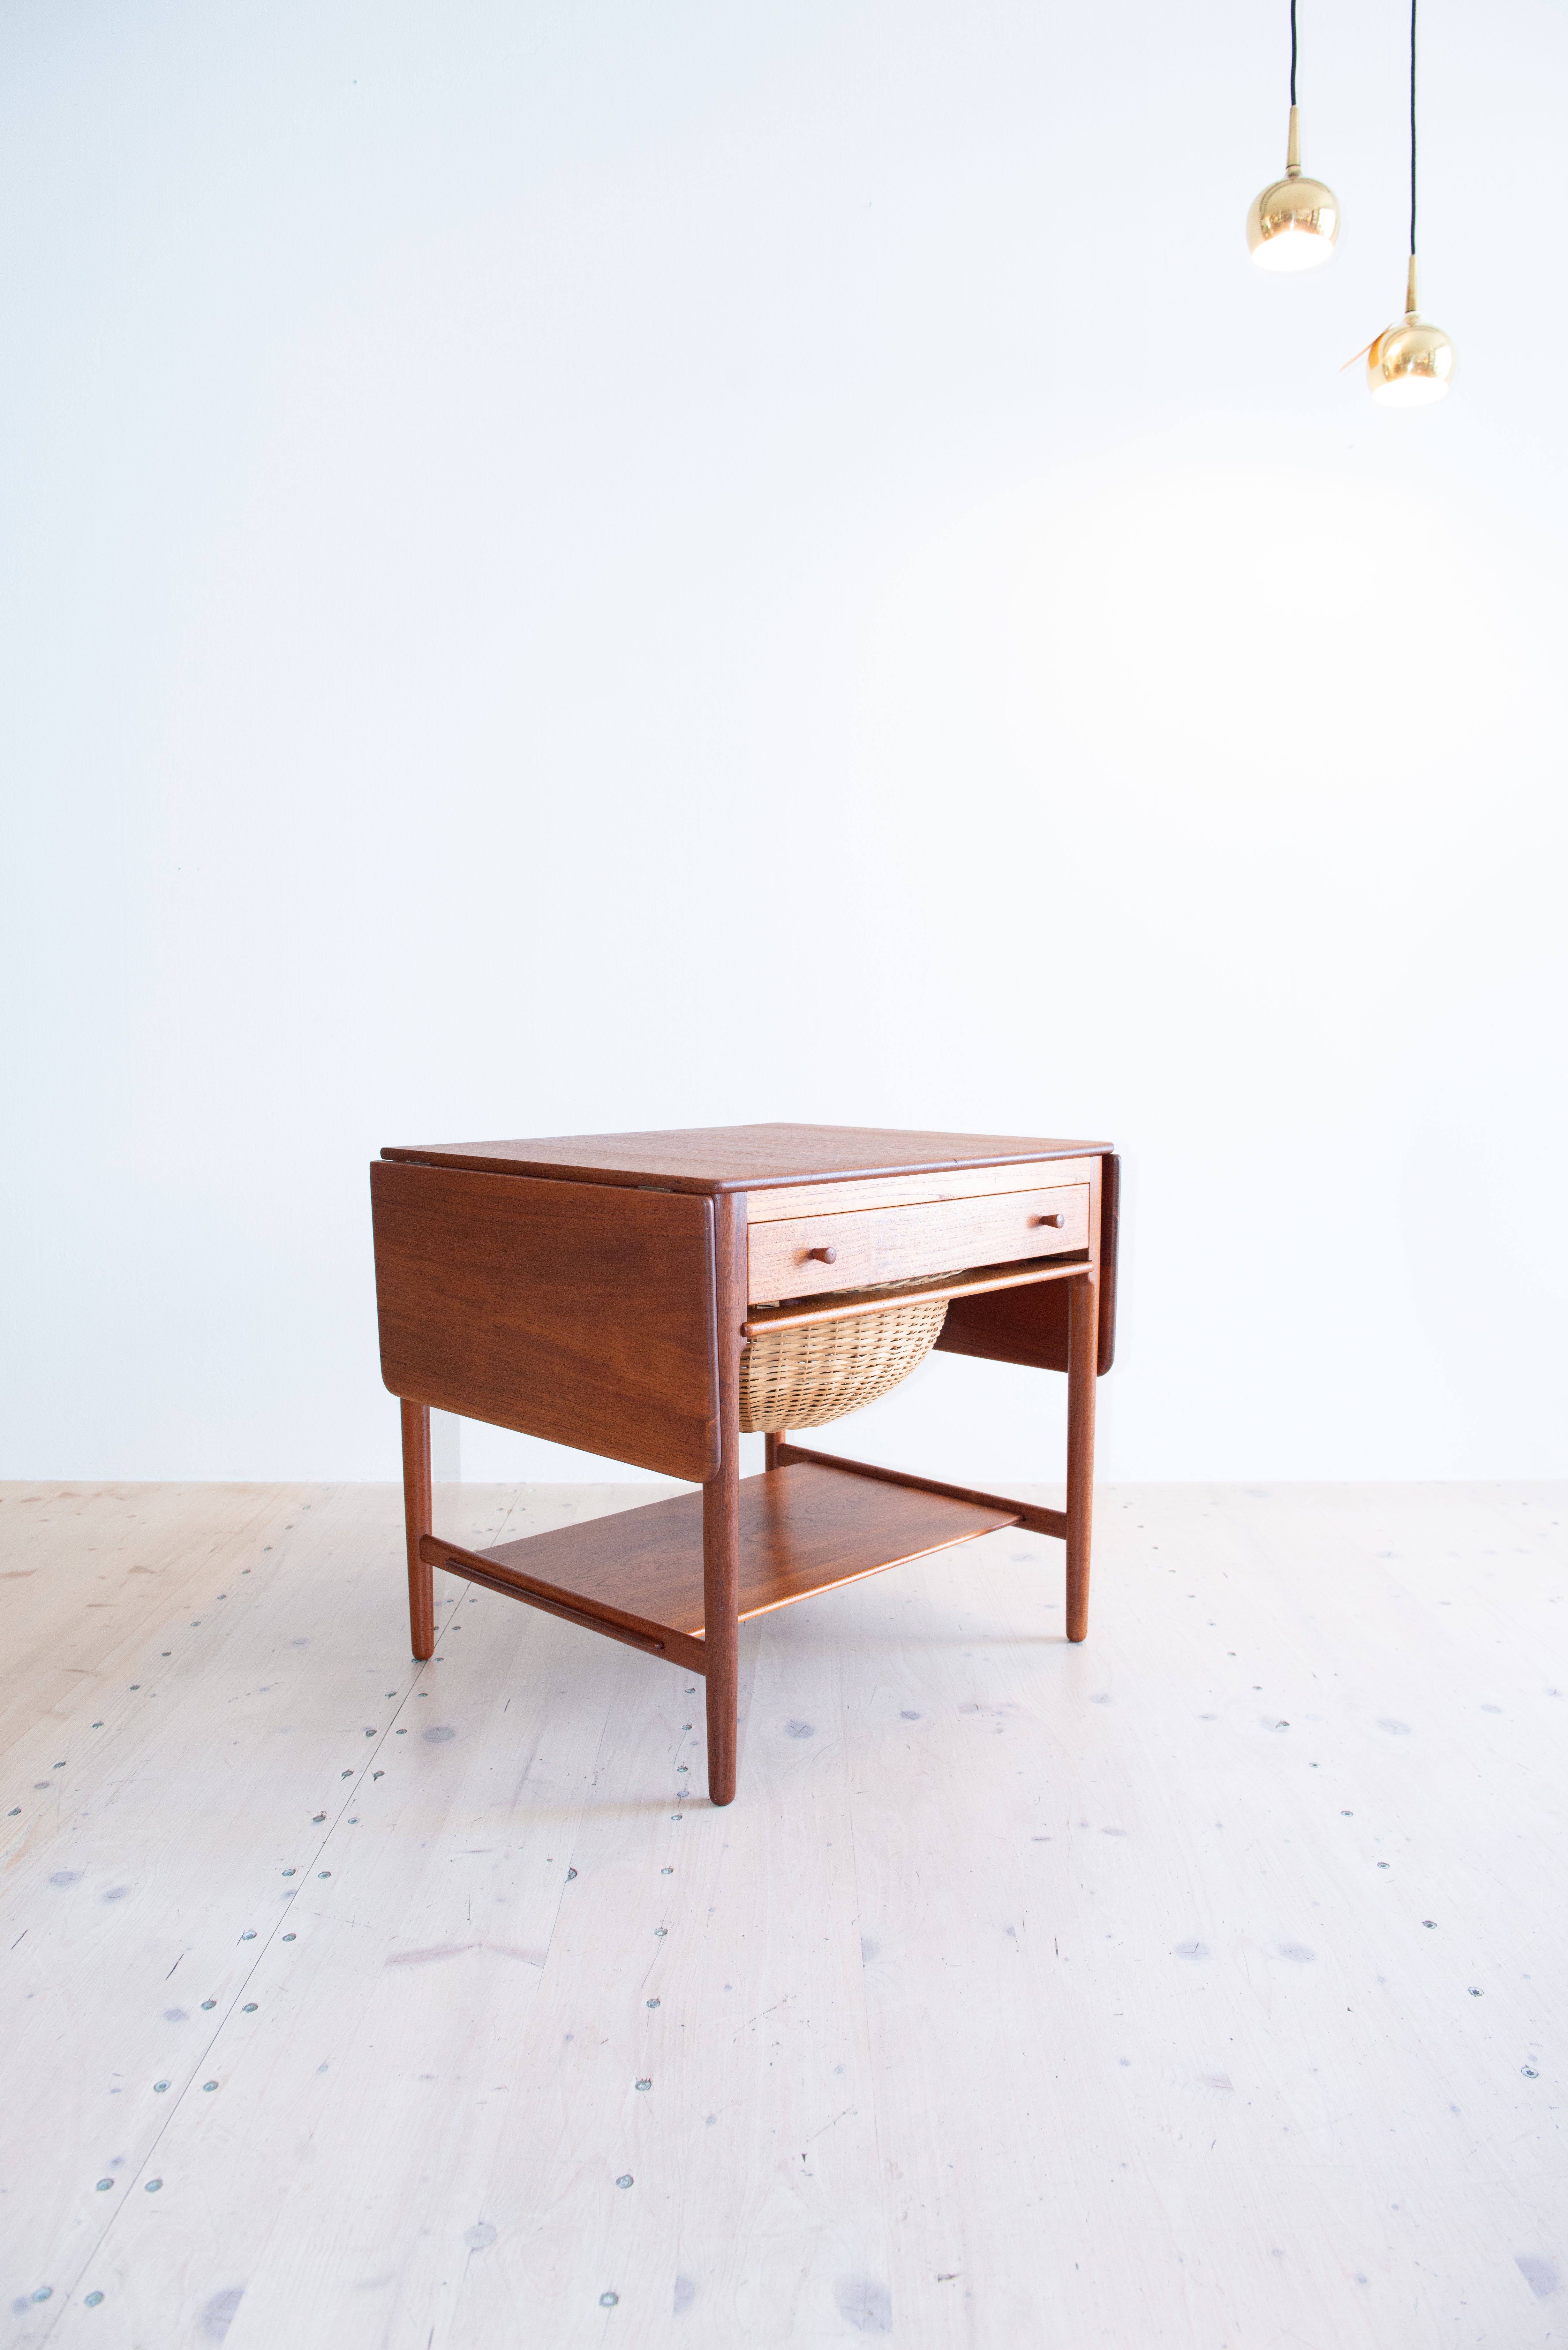 AT33 Teak Sewing Table by Hans J. Wegner. Made by Andreas Tuck. Made in Denmark, 1950s. Available at heyday möbel, Grubenstrasse 14, 8045 Zürich, Switzerland.